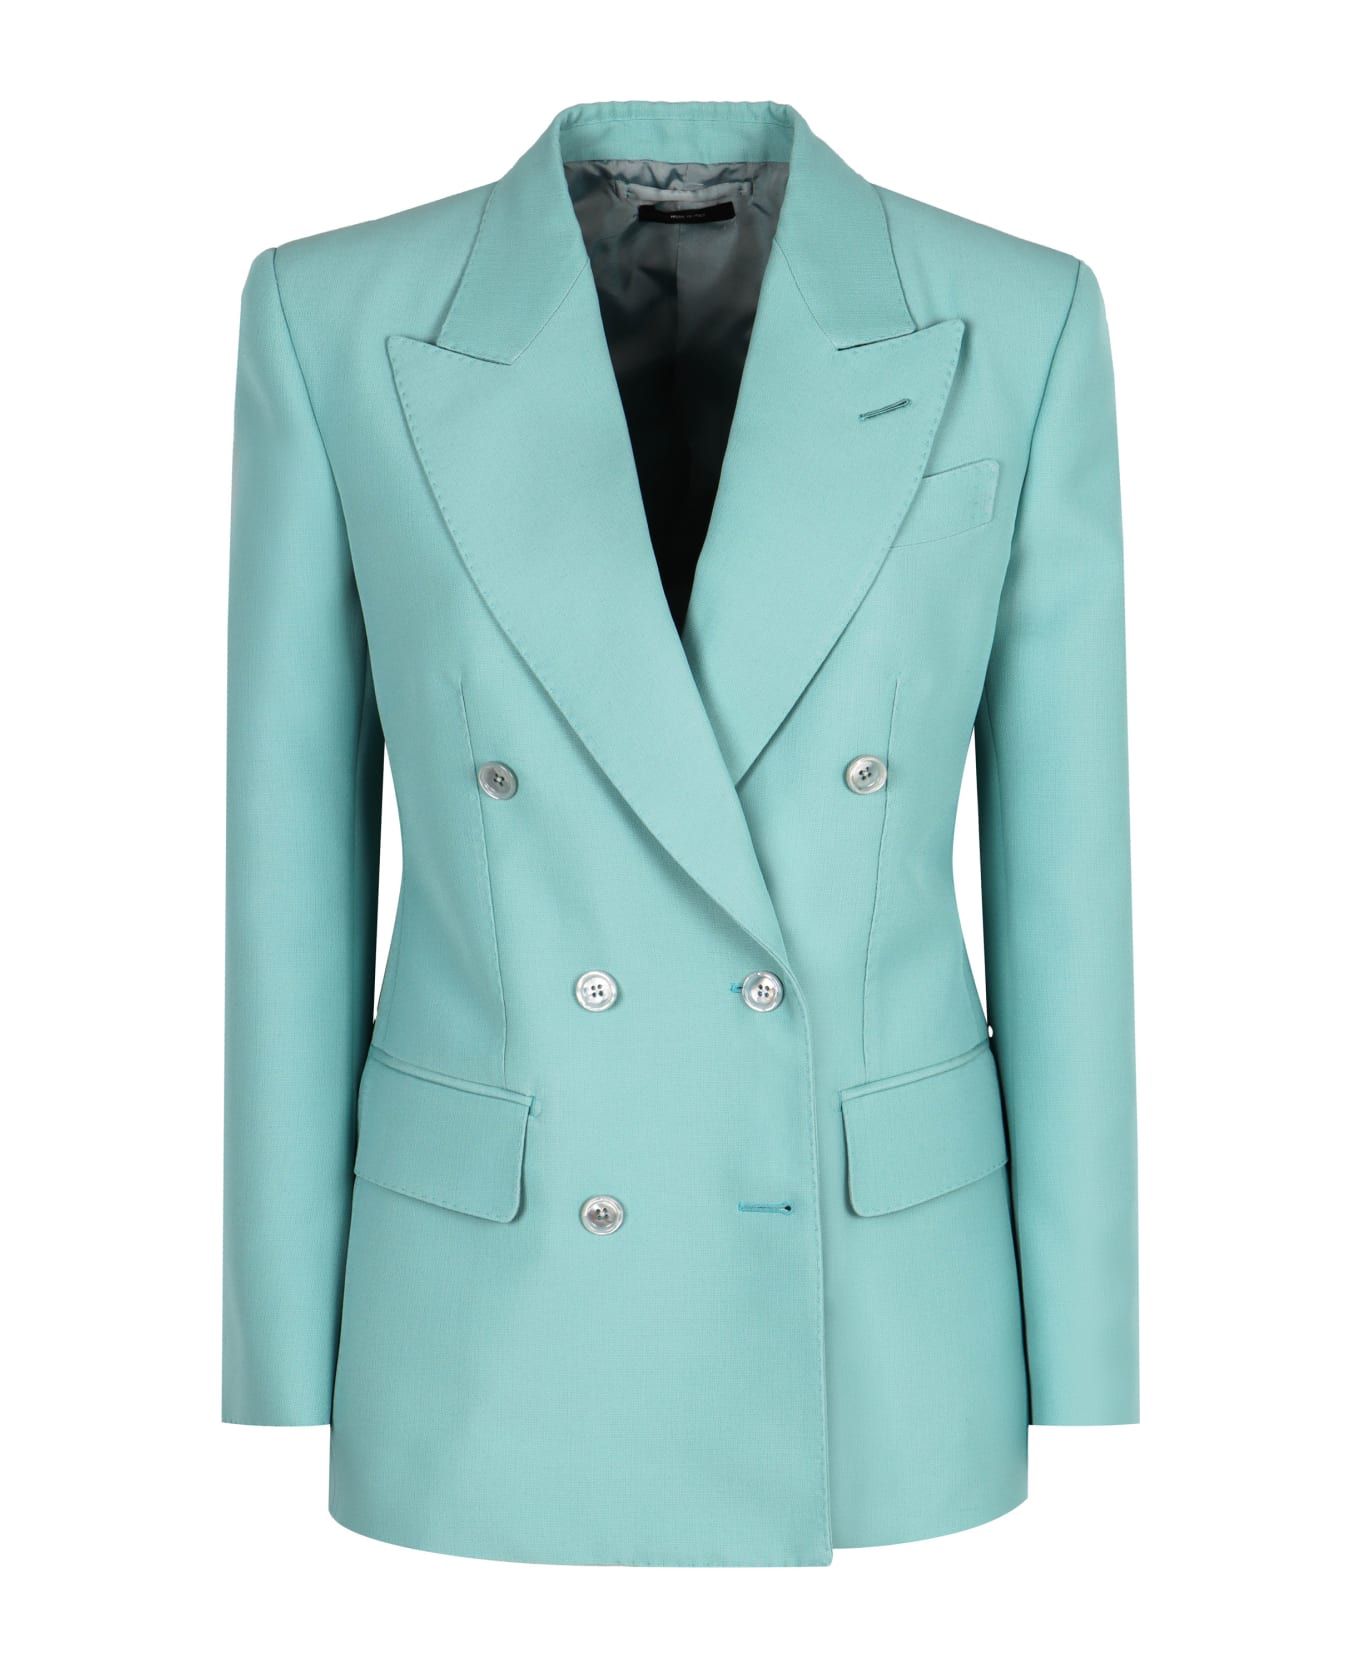 Tom Ford Double-breasted Wool Blazer - BLUE